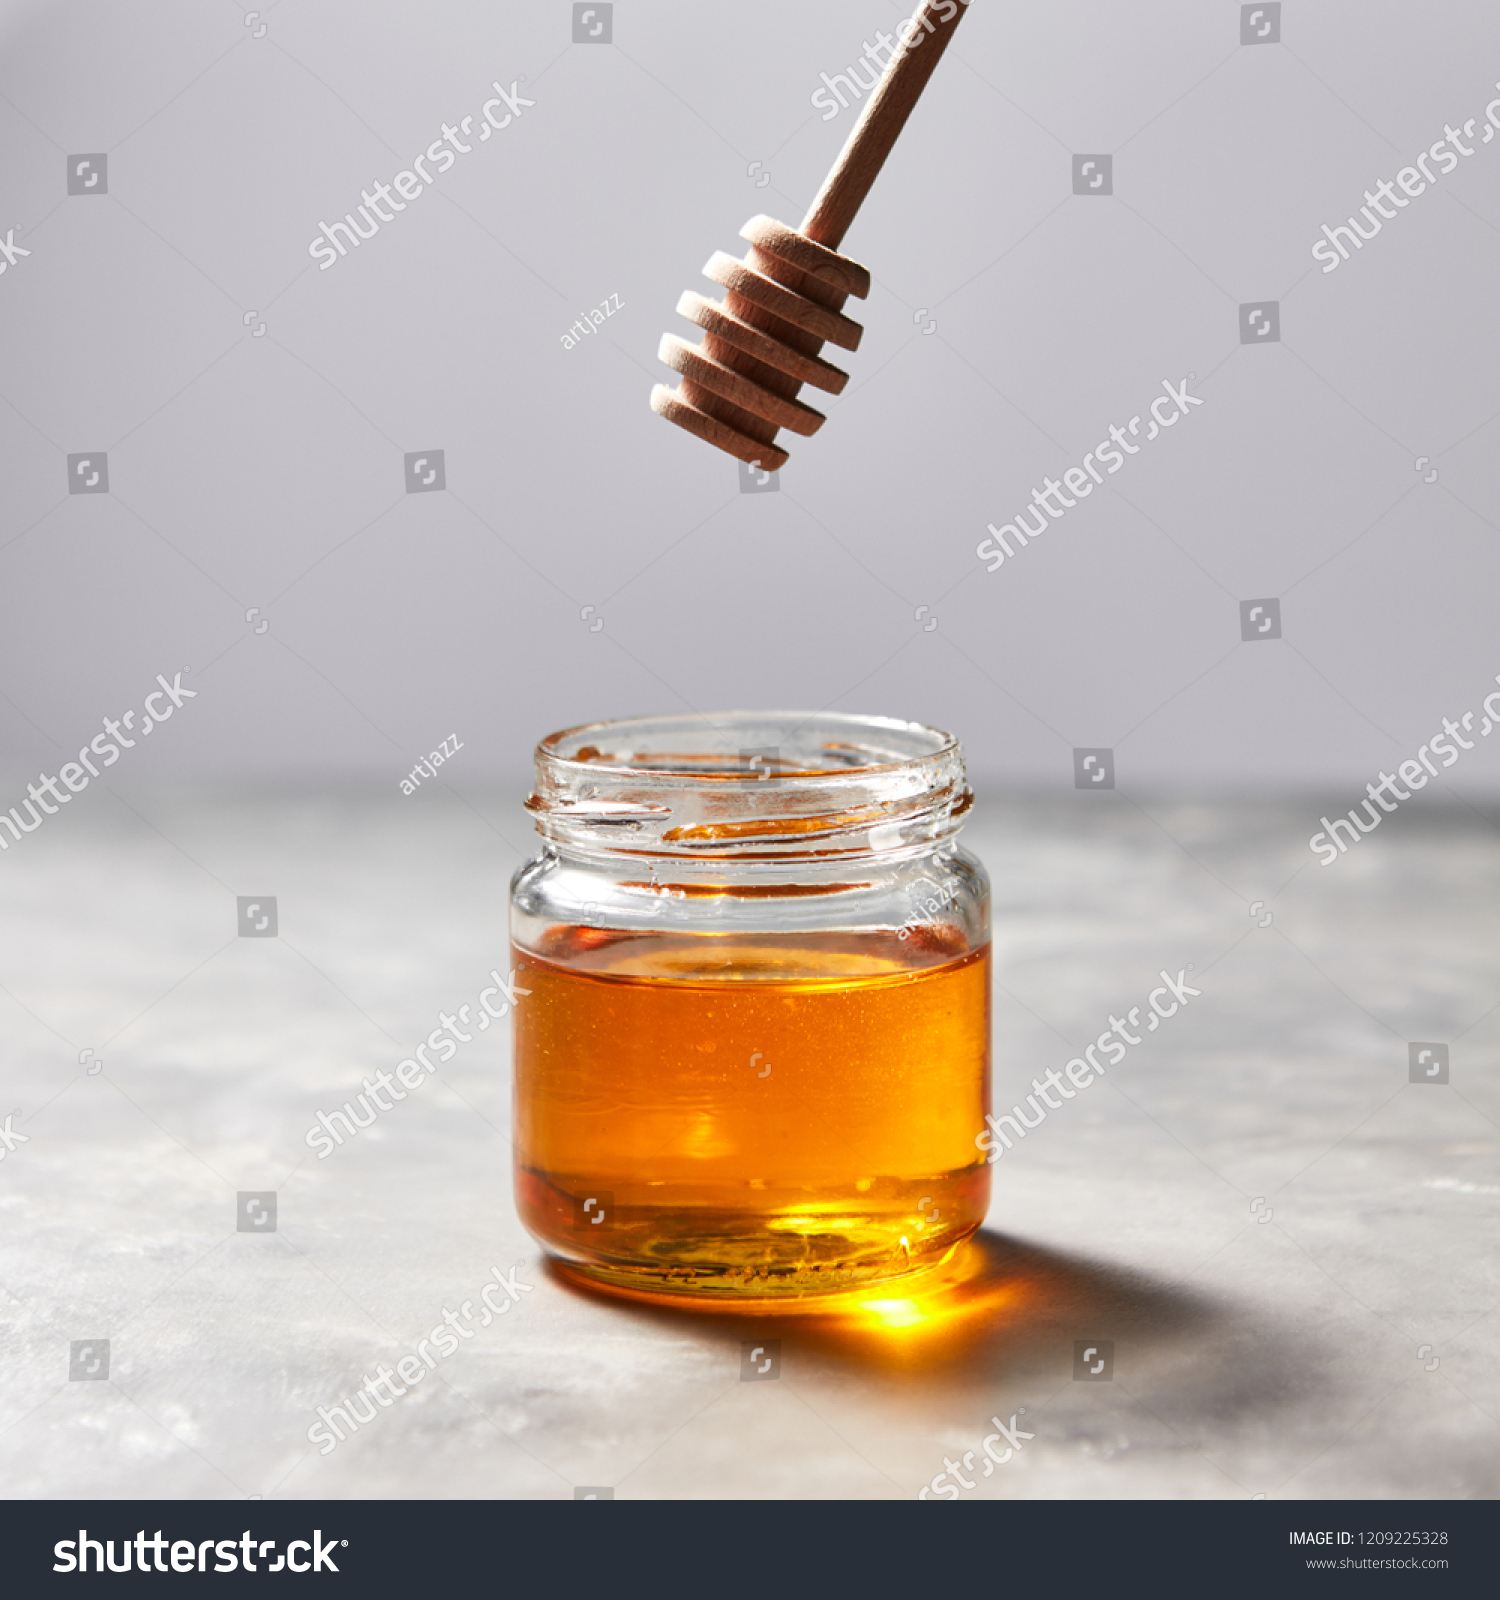 Wooden stick above a glass jar with aromatic natural organic honey on a gray concrete table, place for text. Jewish New Year healthy holiday concept. Traditional useful sweetness. #1209225328